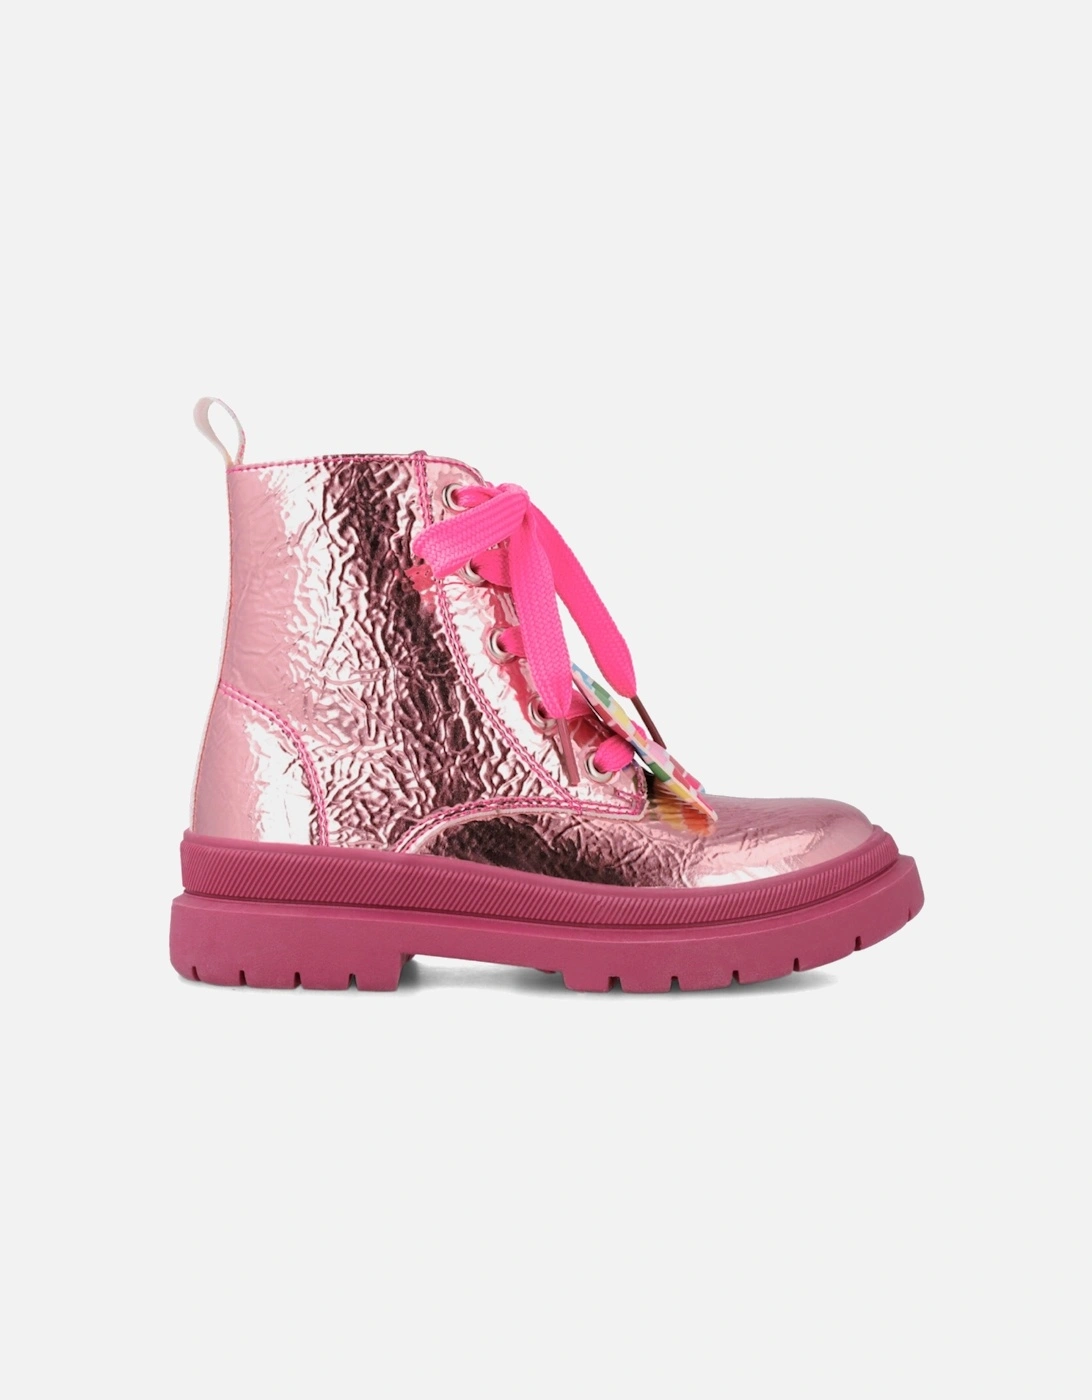 Pink Iridescent Lace Up Boots